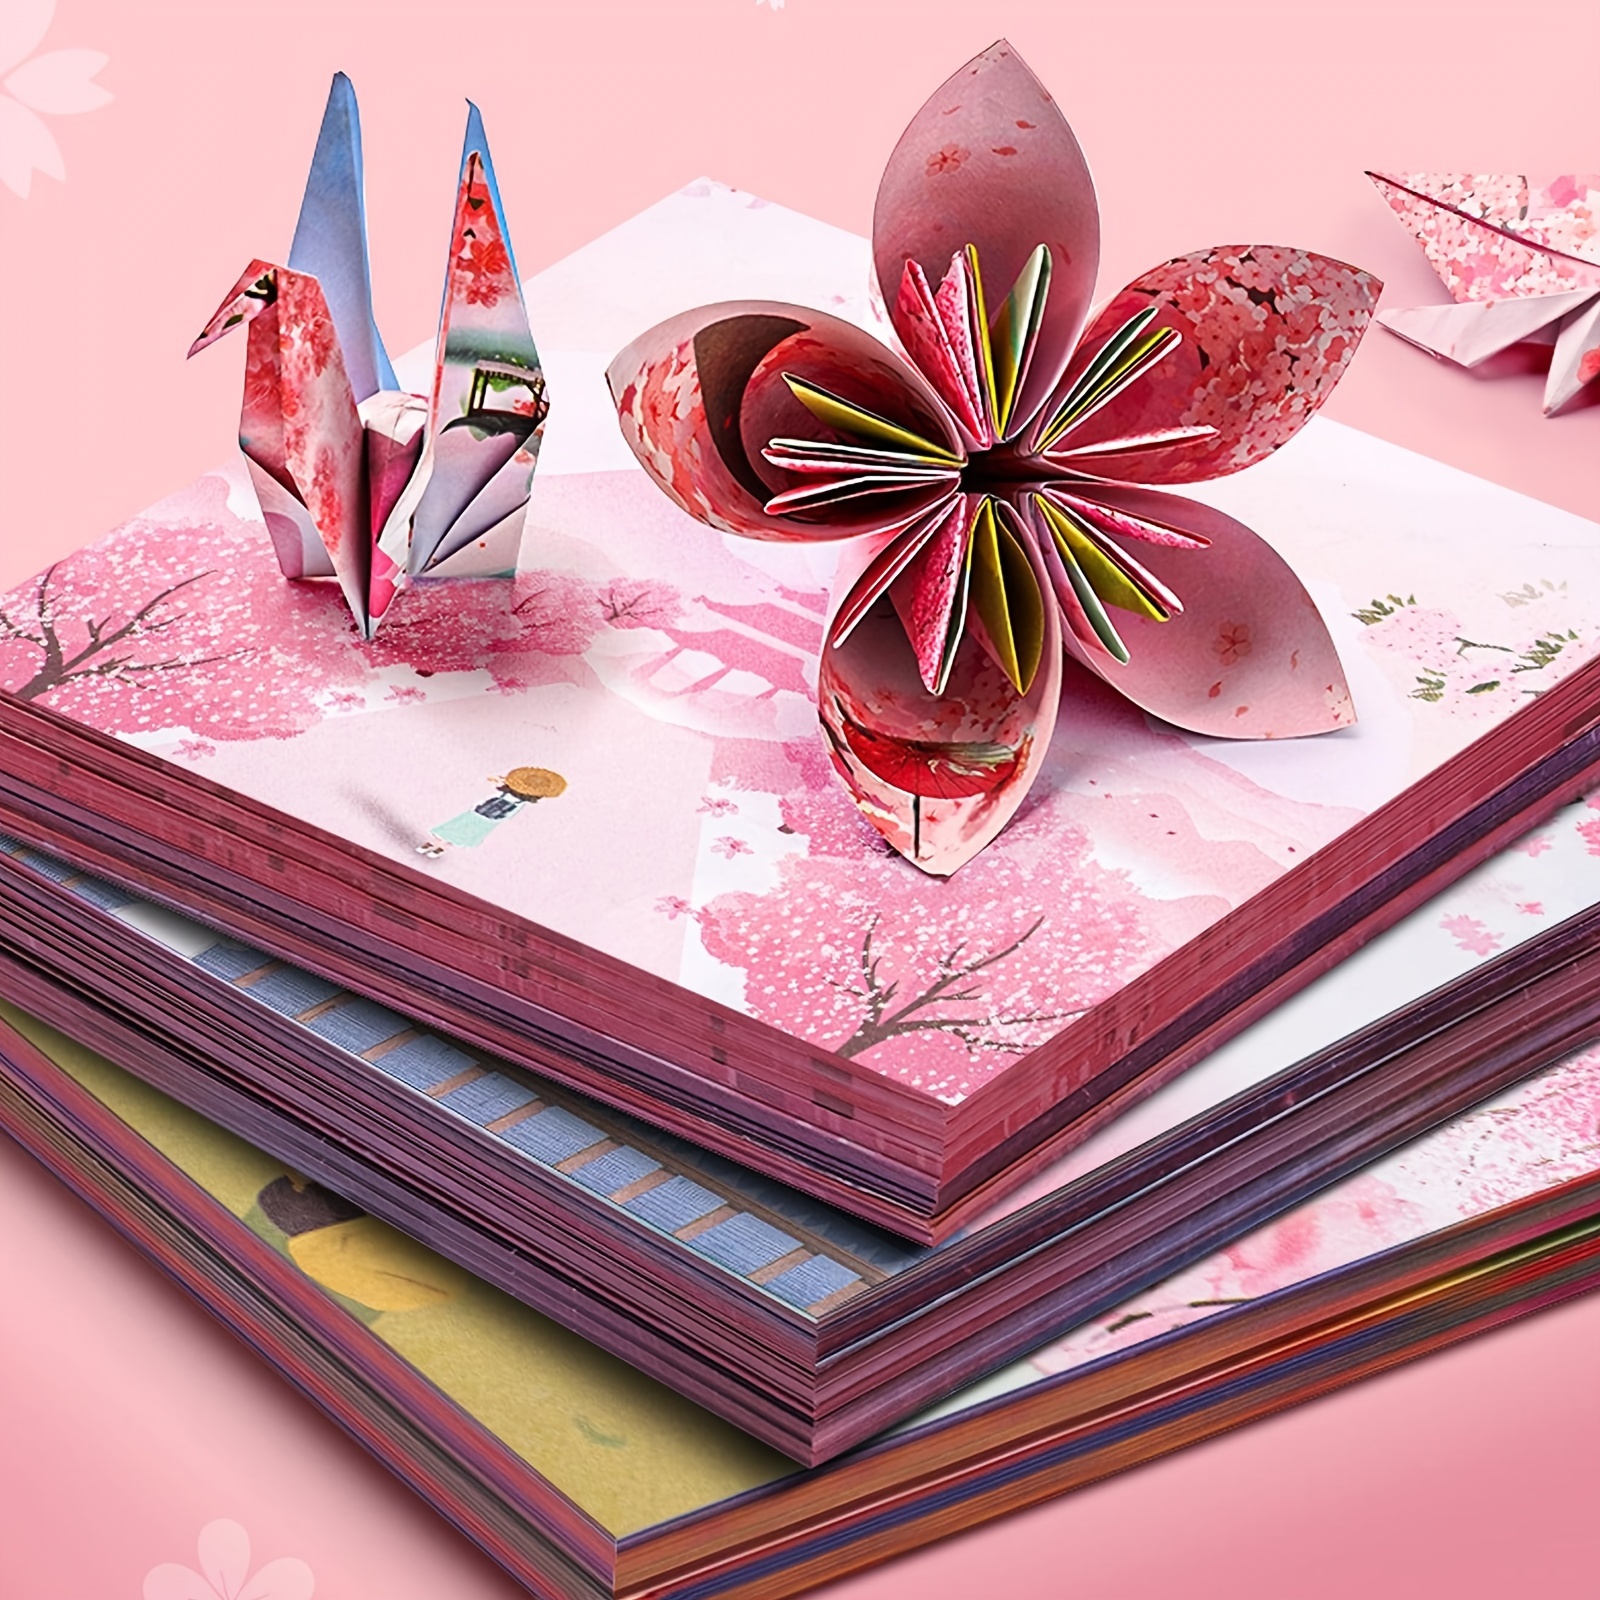 

50sheets Double-sided Origami Paper, 6 Colors Square Easy Fold Paper For Beginner Students Adults Papers Arts And Crafts Projects 5.9inch Starry Sky Cherry Blossoms School Supplies